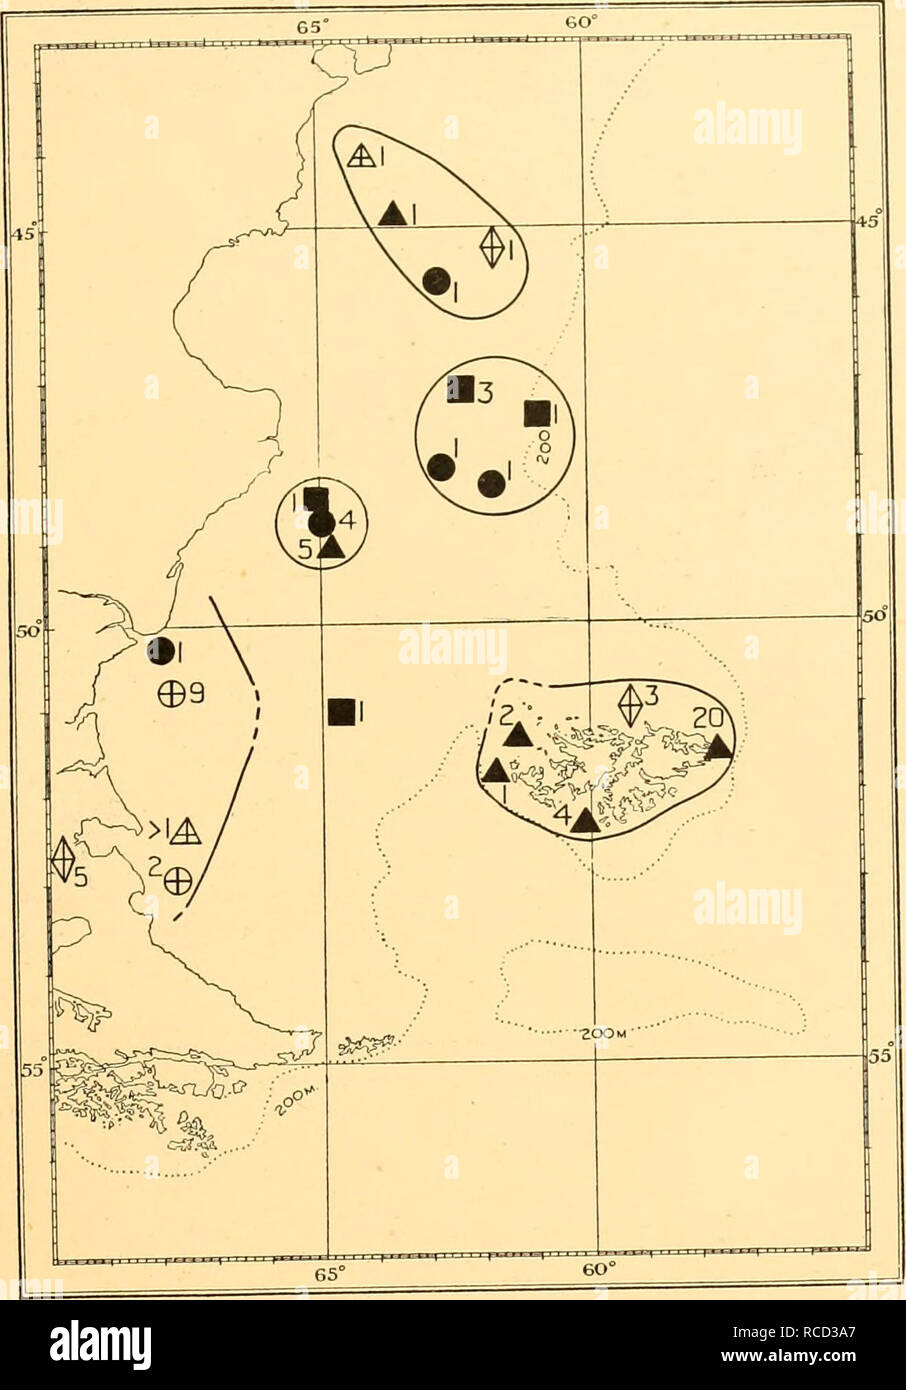 . Discovery reports. Discovery (Ship); Scientific expeditions; Ocean; Antarctica; Falkland Islands. DISTRIBUTION AND GENERAL NOTES ON THE SPECIES 377. Fie ,2 Distribution of Agonopsis chiloensis: positive records only, roughly contoured to show their localization in differerit seLns'. oLonds, springfcircles, summer; triangles, autumn; squares, winter. Solid symbols represent captures m Trawl + accessory nets'; cross symbols with 'Other gear'. LIPARIDAE Careproctus falklandica (Lonnberg). Six specimens of this fish were trawled at St. WS89 off Cape Virgins in April 1927. It was previously known Stock Photo